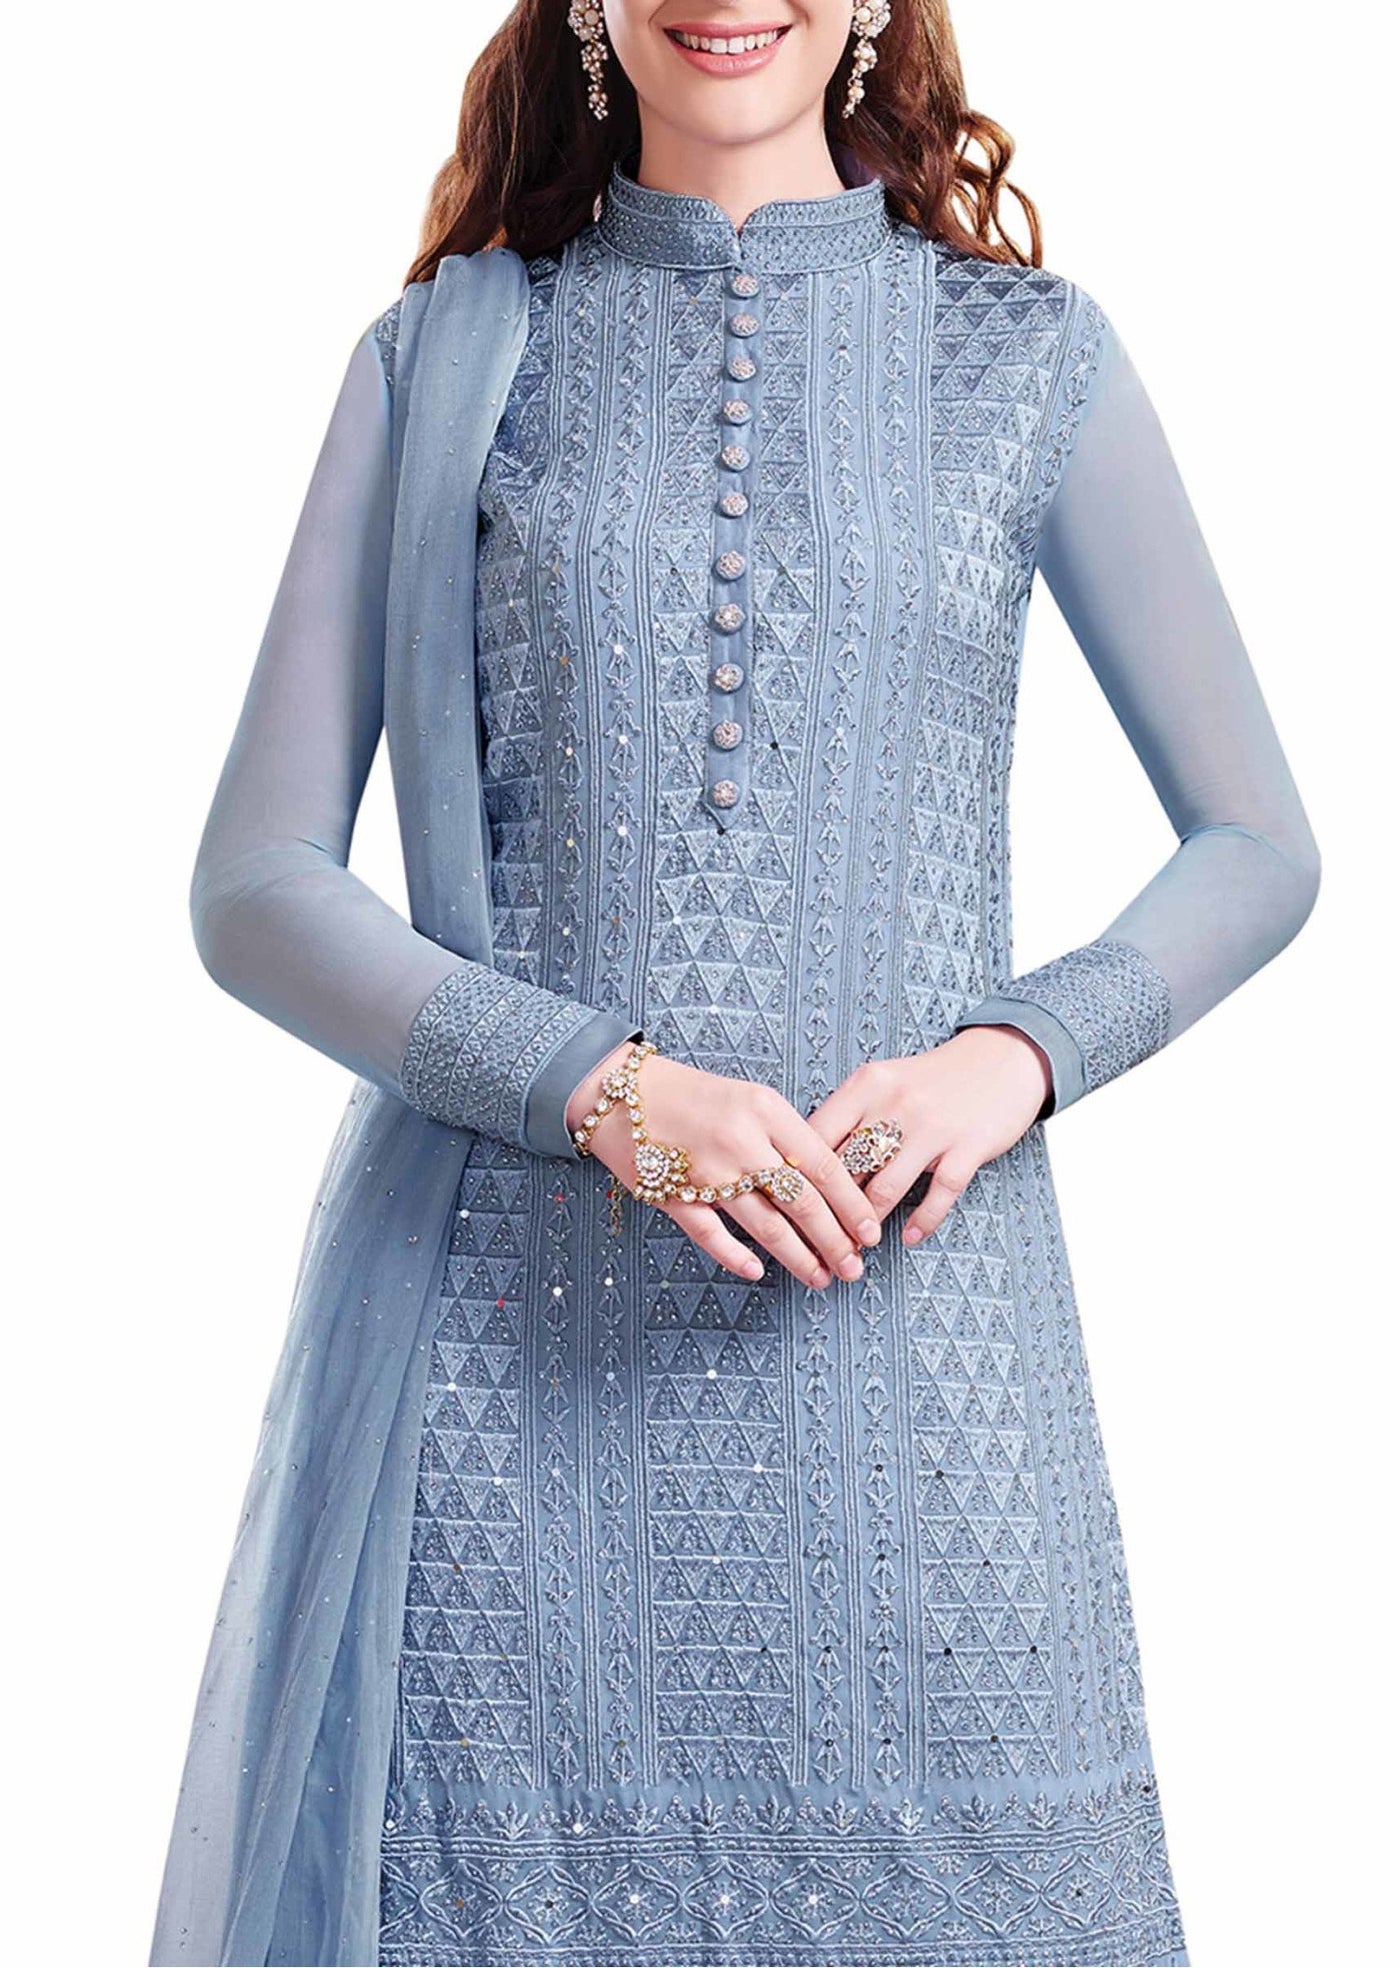 Grey blue unstitched suit - Indian Clothing in Denver, CO, Aurora, CO, Boulder, CO, Fort Collins, CO, Colorado Springs, CO, Parker, CO, Highlands Ranch, CO, Cherry Creek, CO, Centennial, CO, and Longmont, CO. Nationwide shipping USA - India Fashion X